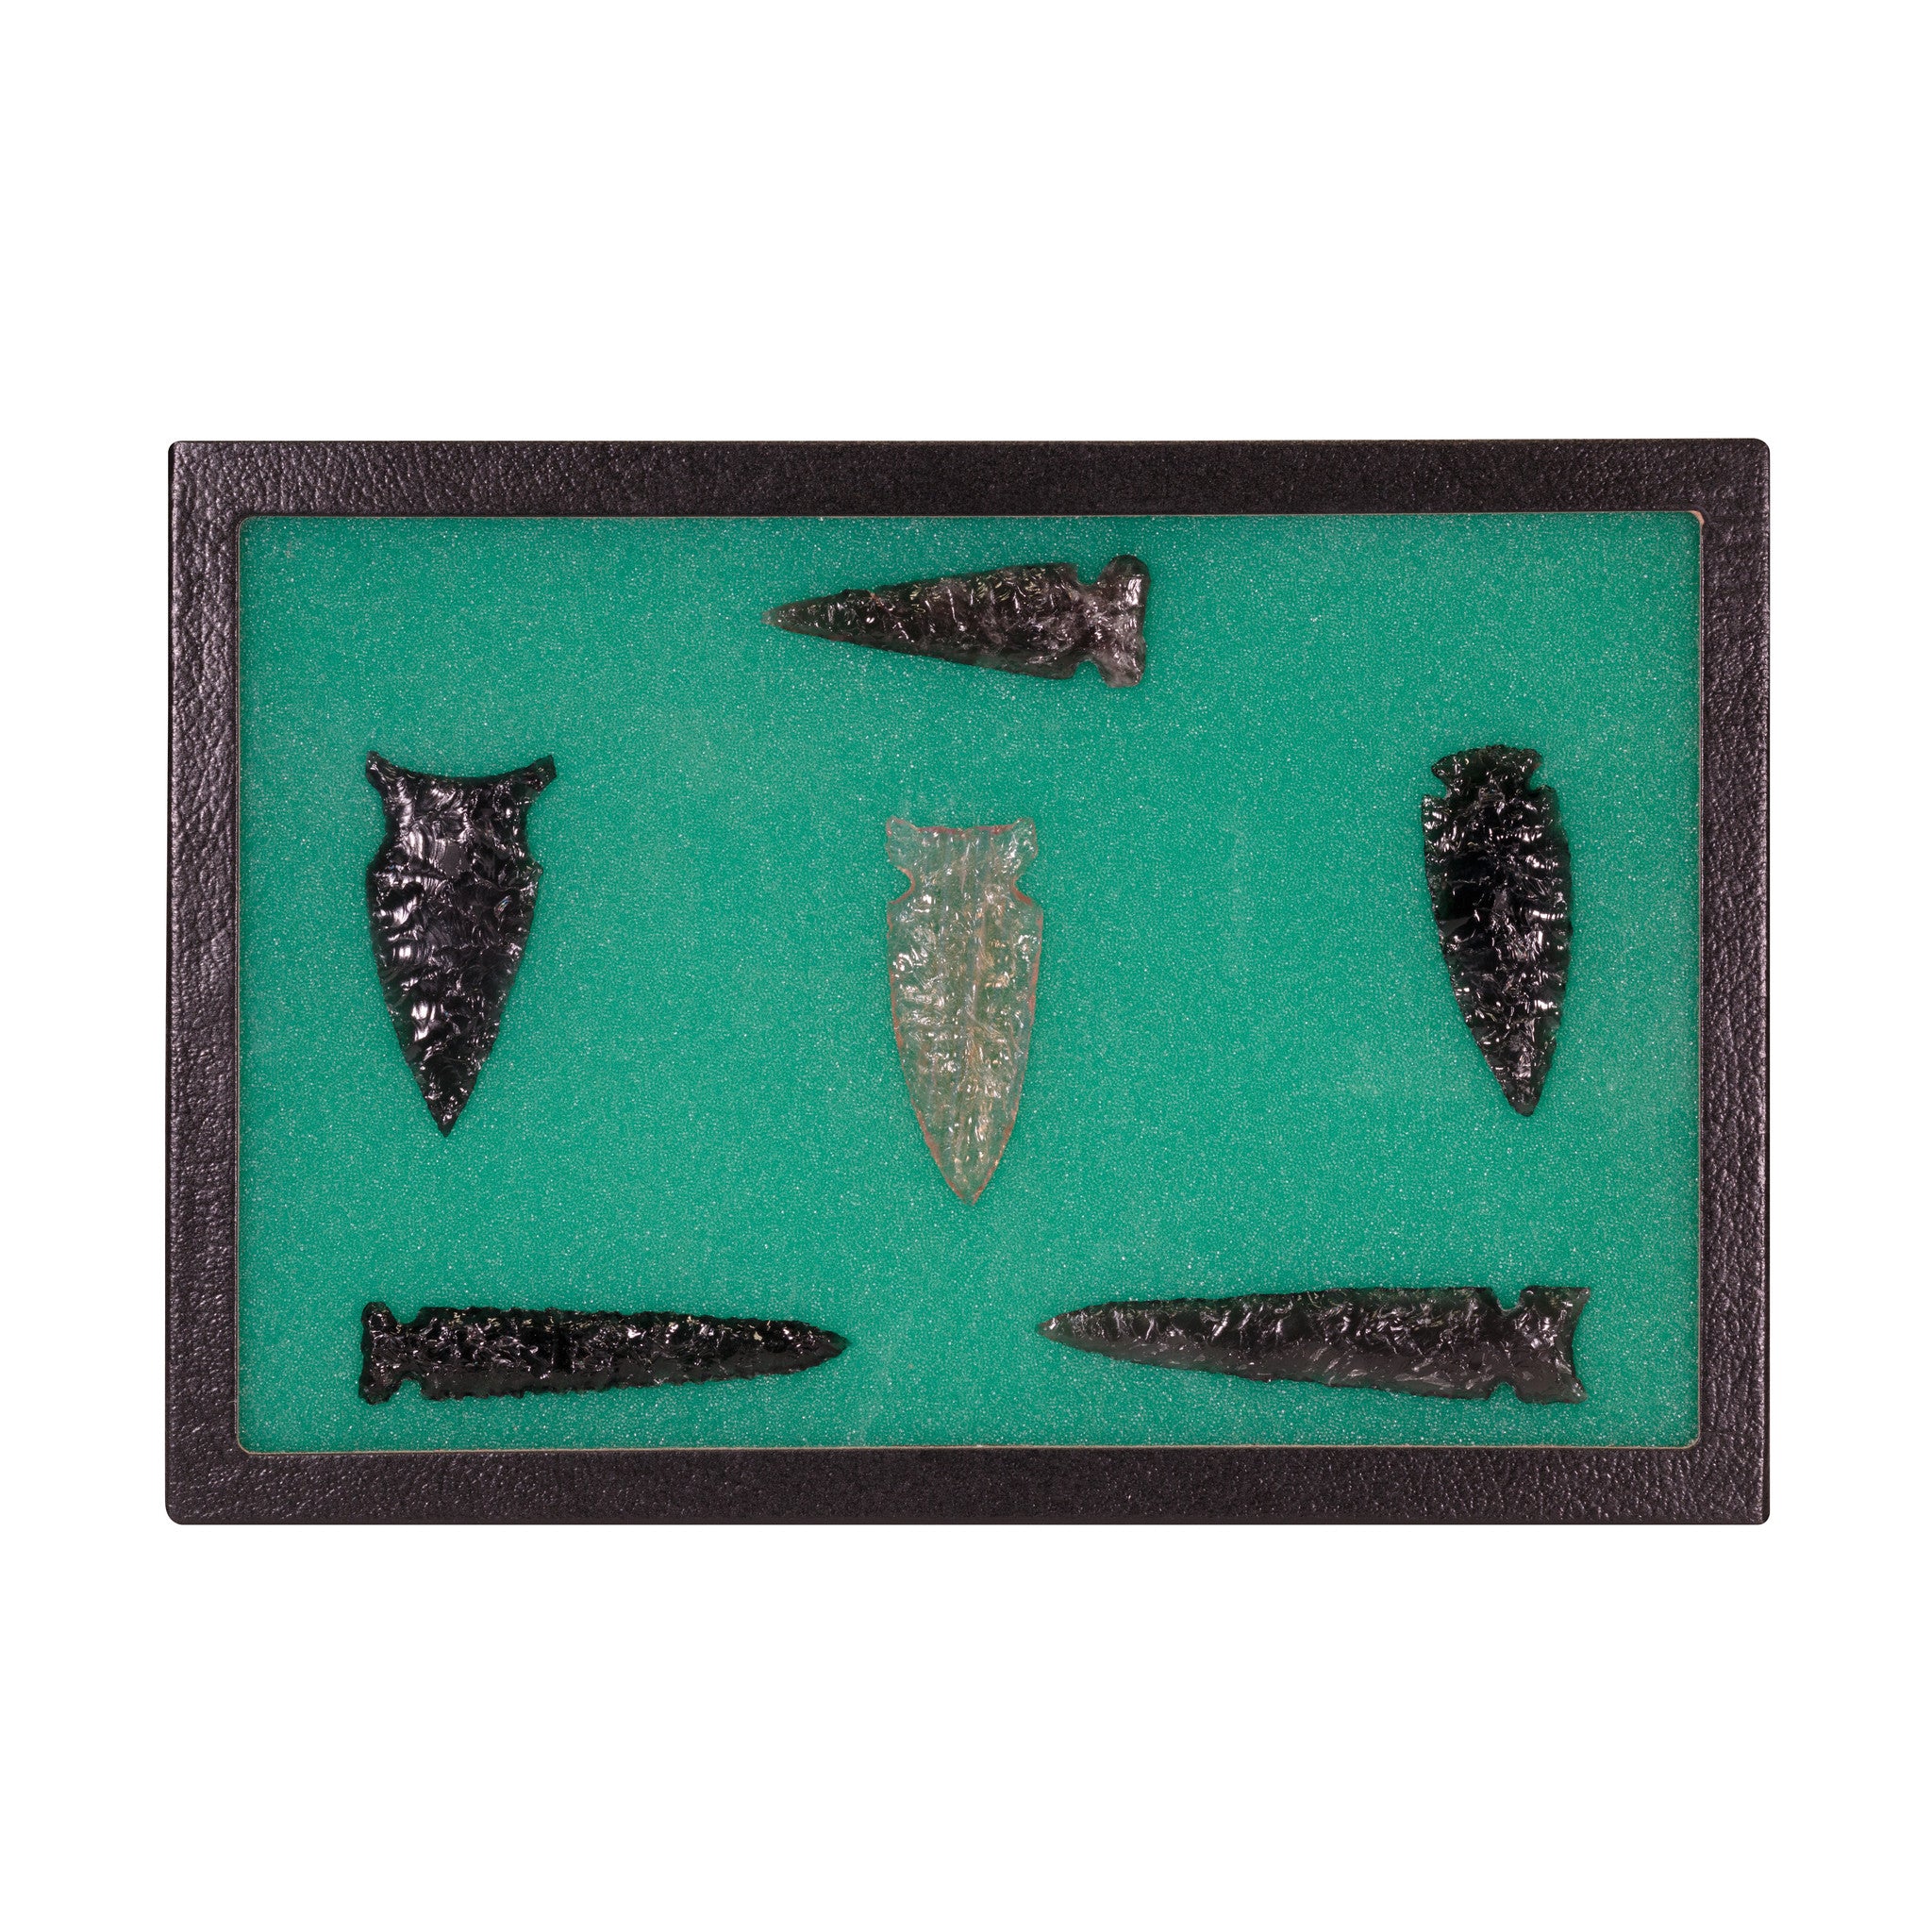 Collection of 6 Obsidian Points, Native, Stone and Tools, Arrowhead